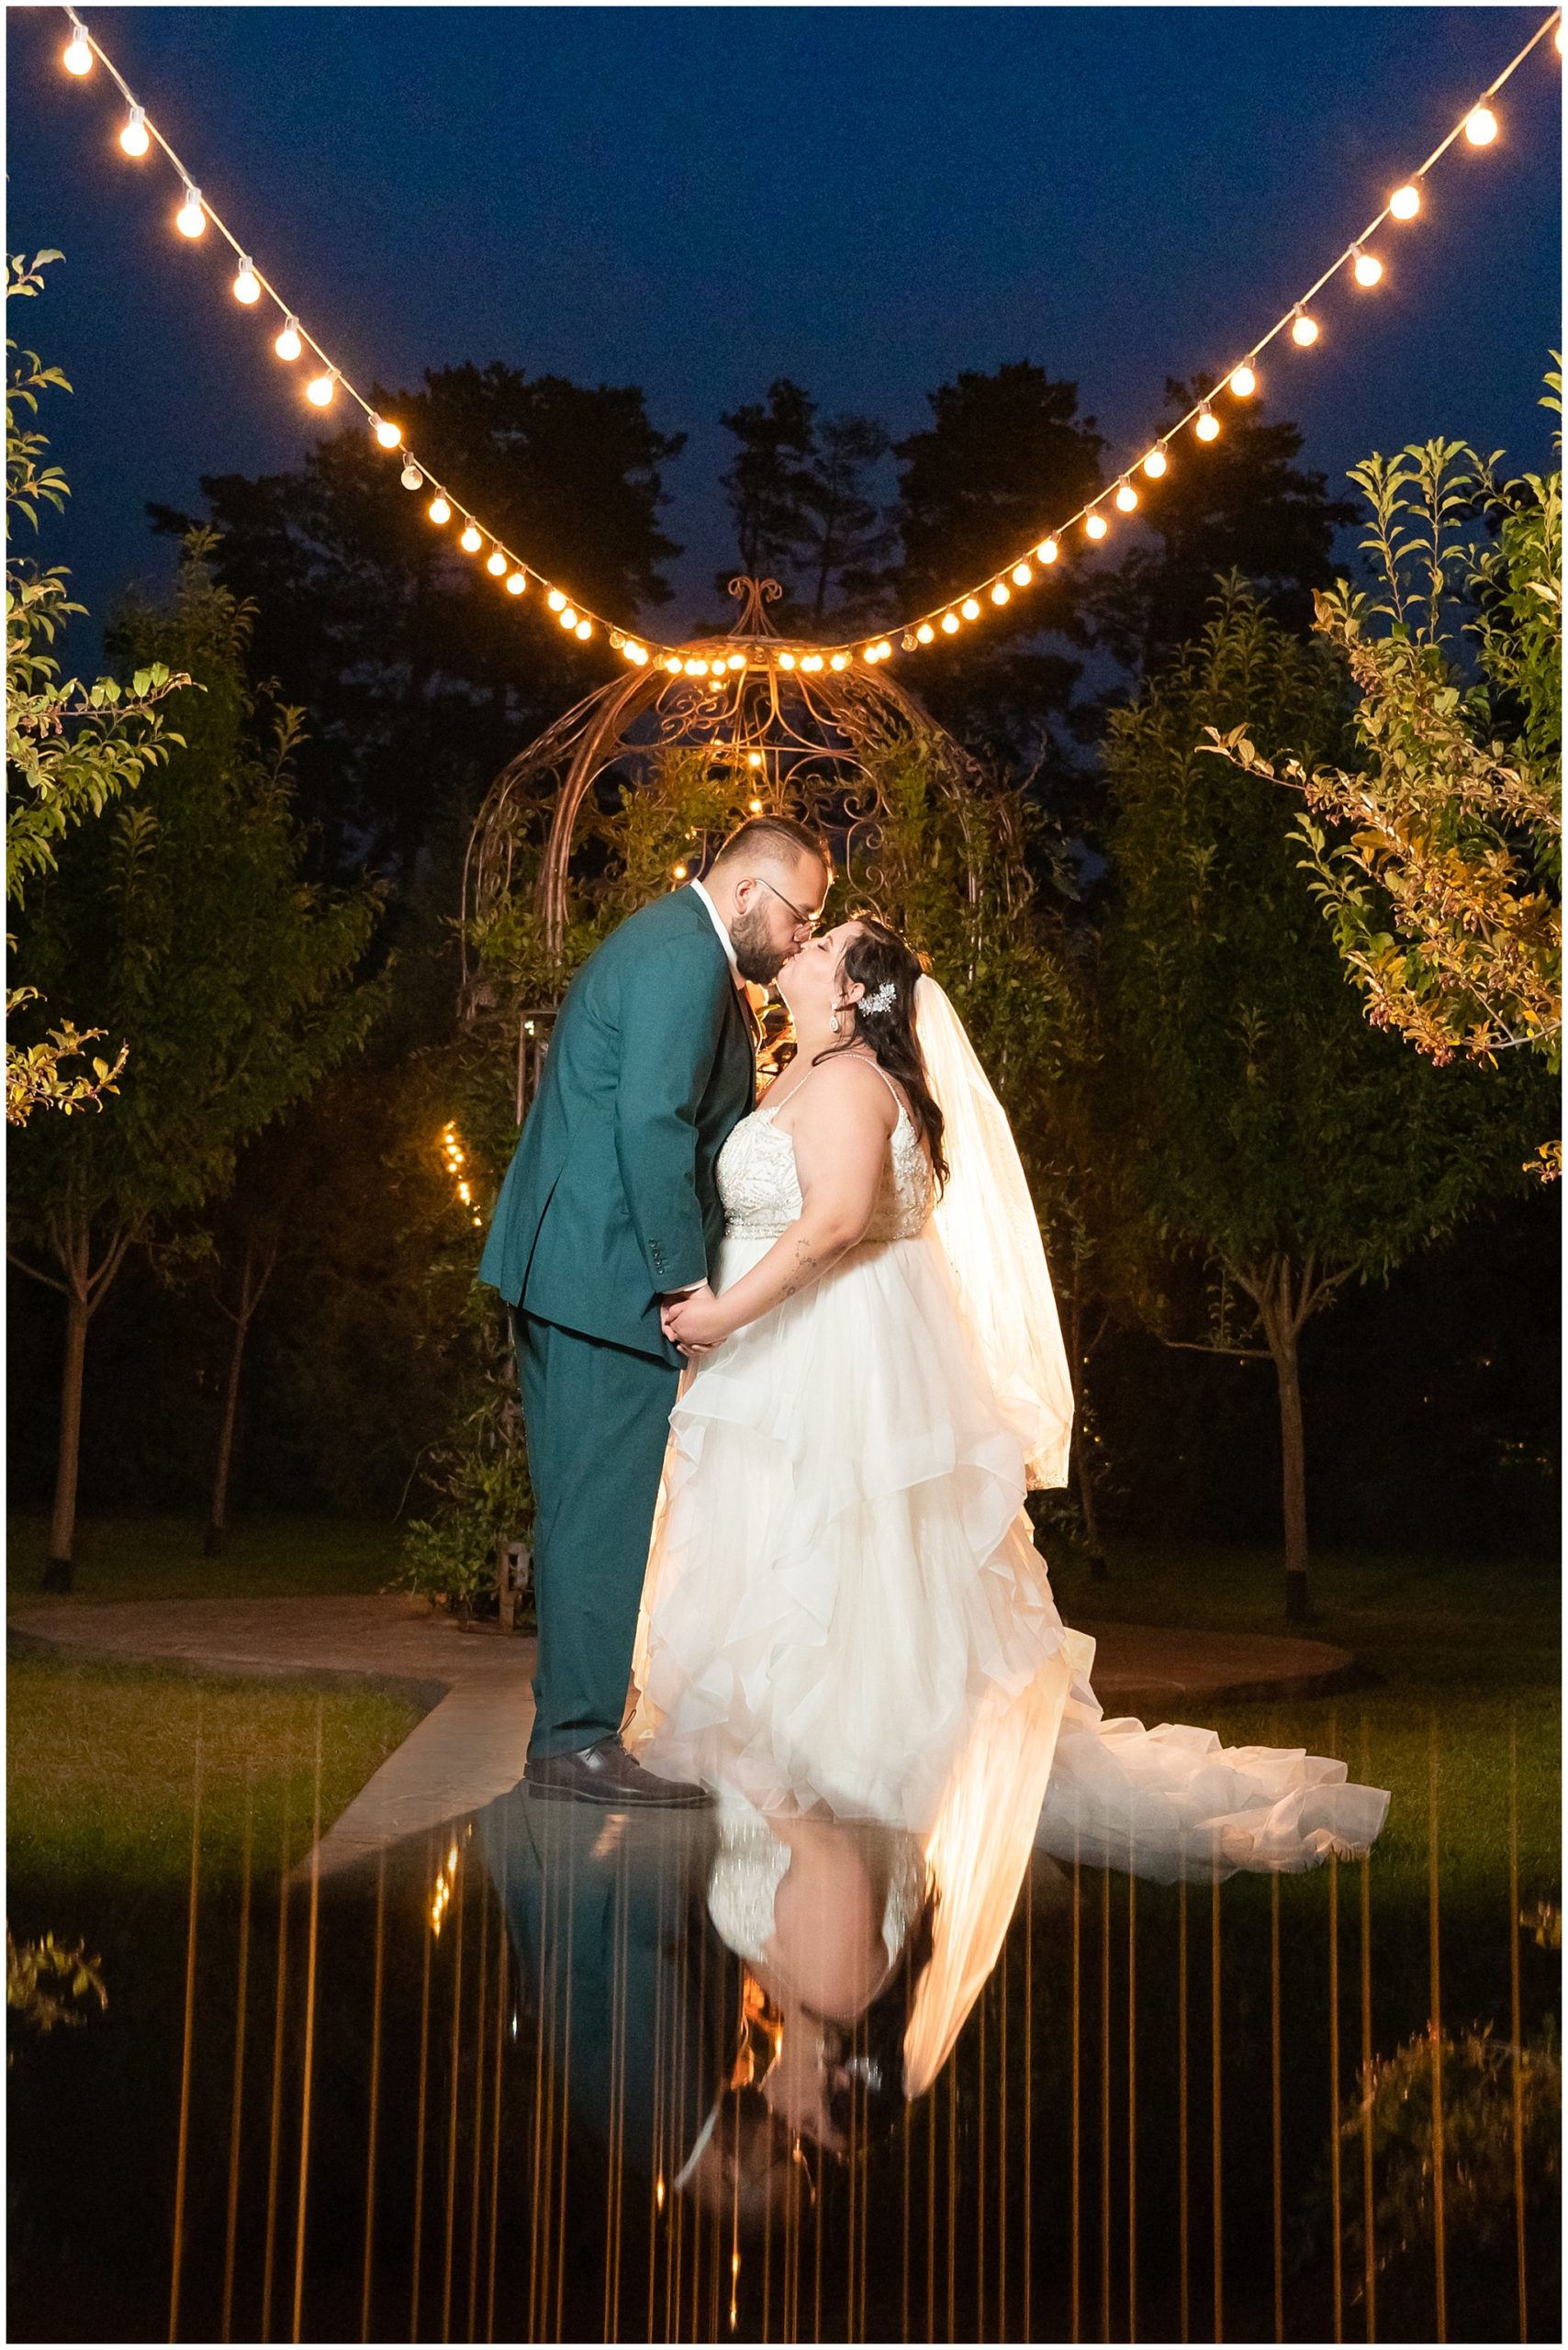 Bride and groom creative portraits at night | Green and Salmon Pink Utah Wedding | Oak Hills | Jessie and Dallin Photography